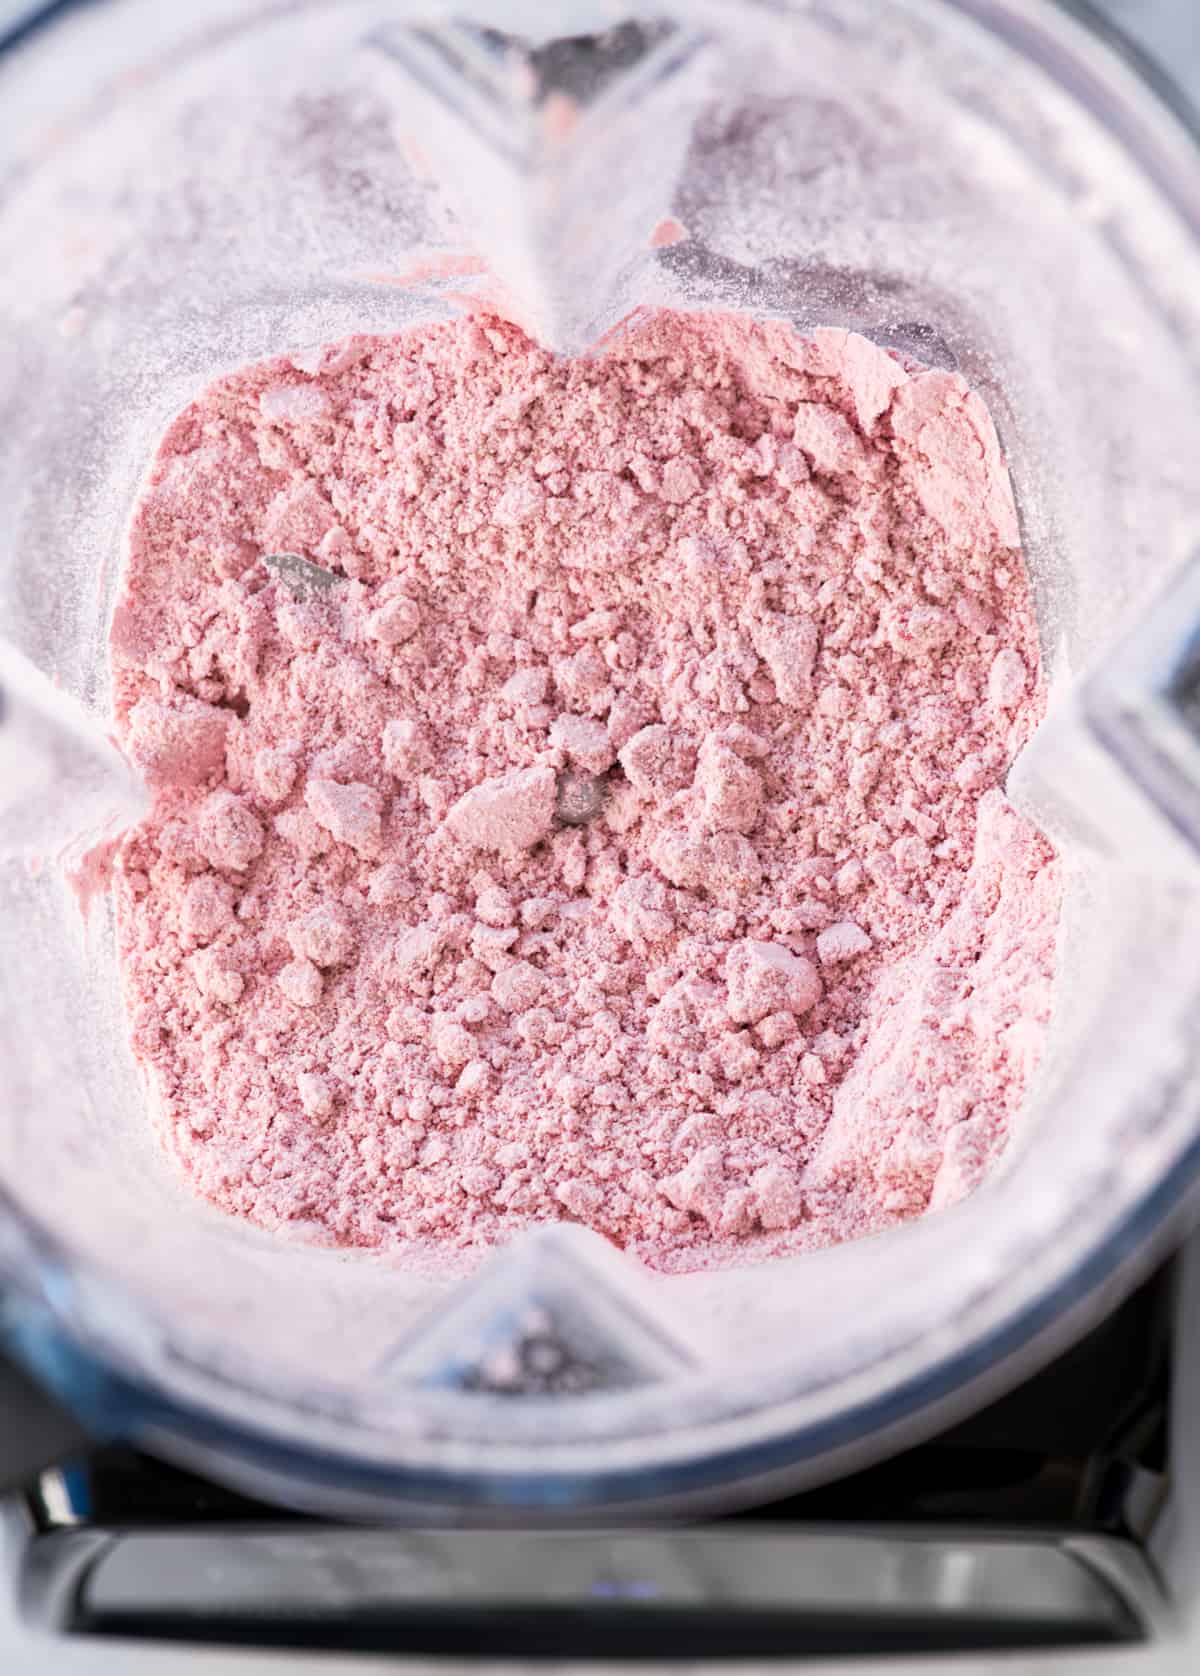 Overhead view of the pink "flour" that is created by blending the dry ingredients in raspberry baked donuts in the vitamix